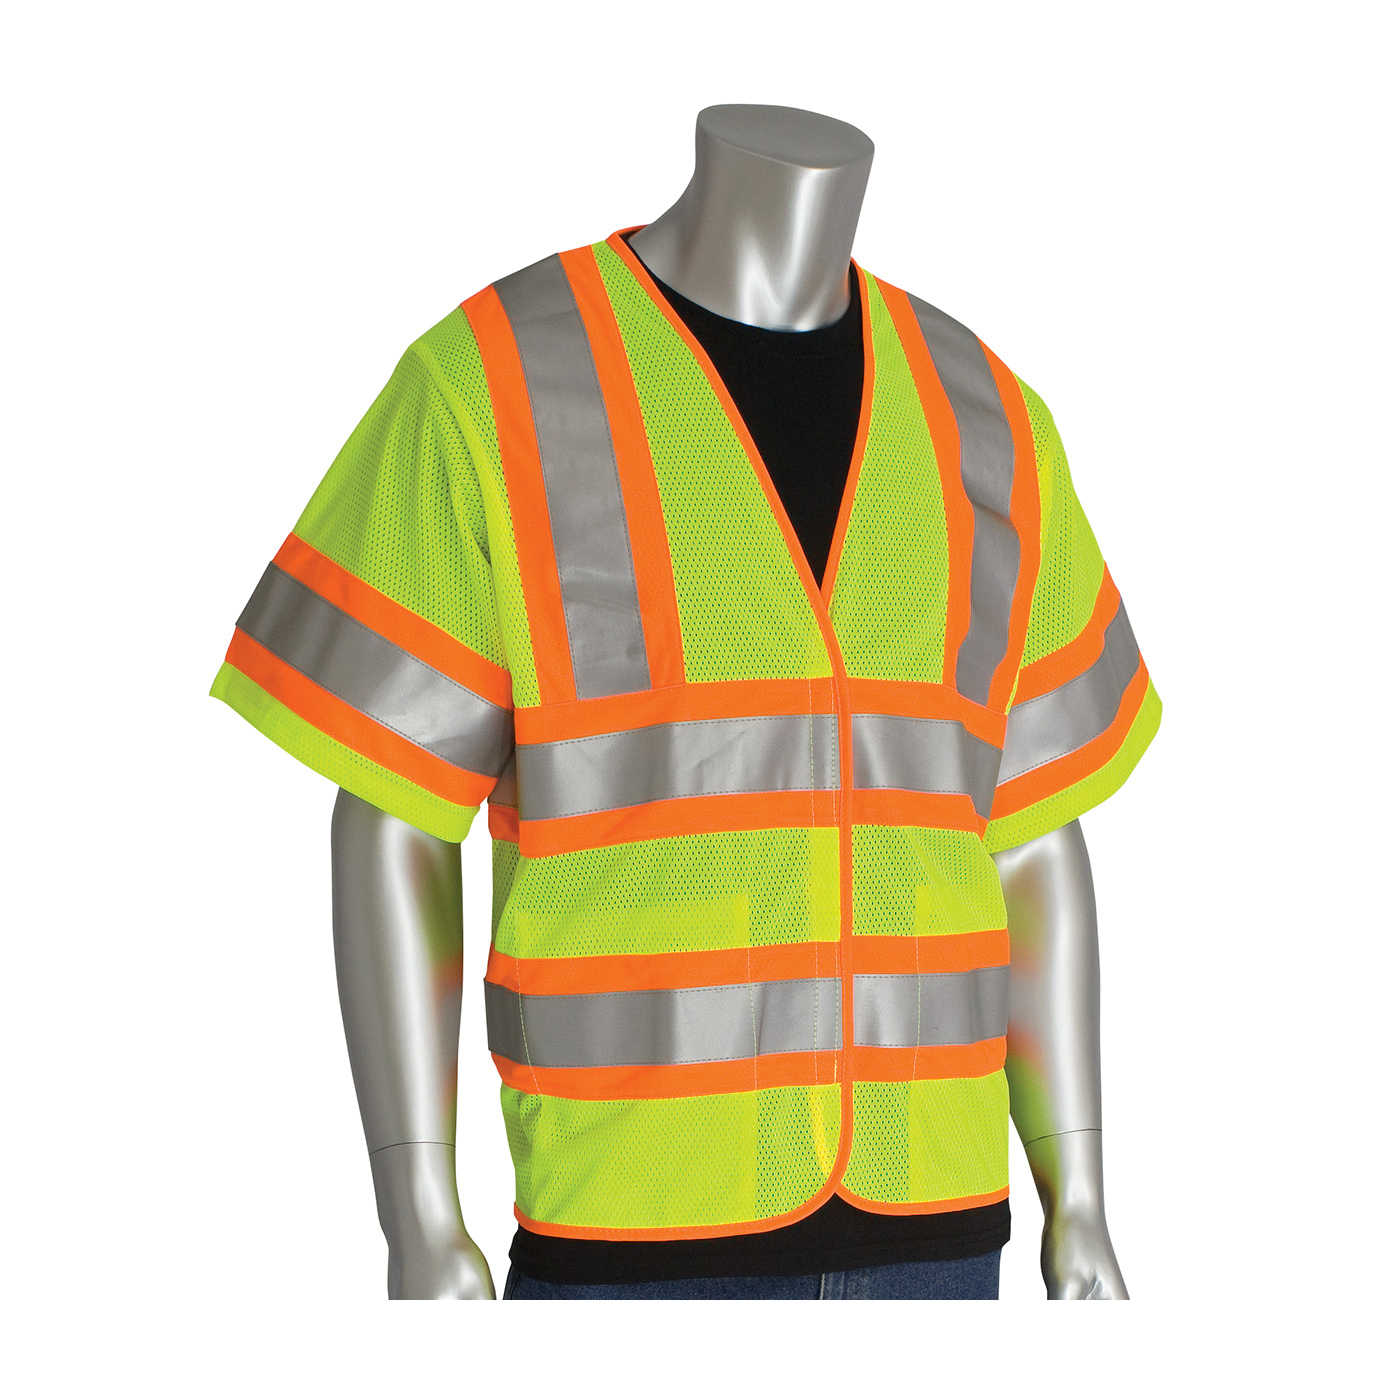 PIP® SafetyGear 305-HSVPFRLY-4X/5X 2-Tone FR Treated Safety Vest, 4XL/5XL, Hi-Viz Yellow, Polyester, Hook and Loop Closure, 2 Pockets, ANSI Class: Class 3, Specifications Met: ANSI Specified